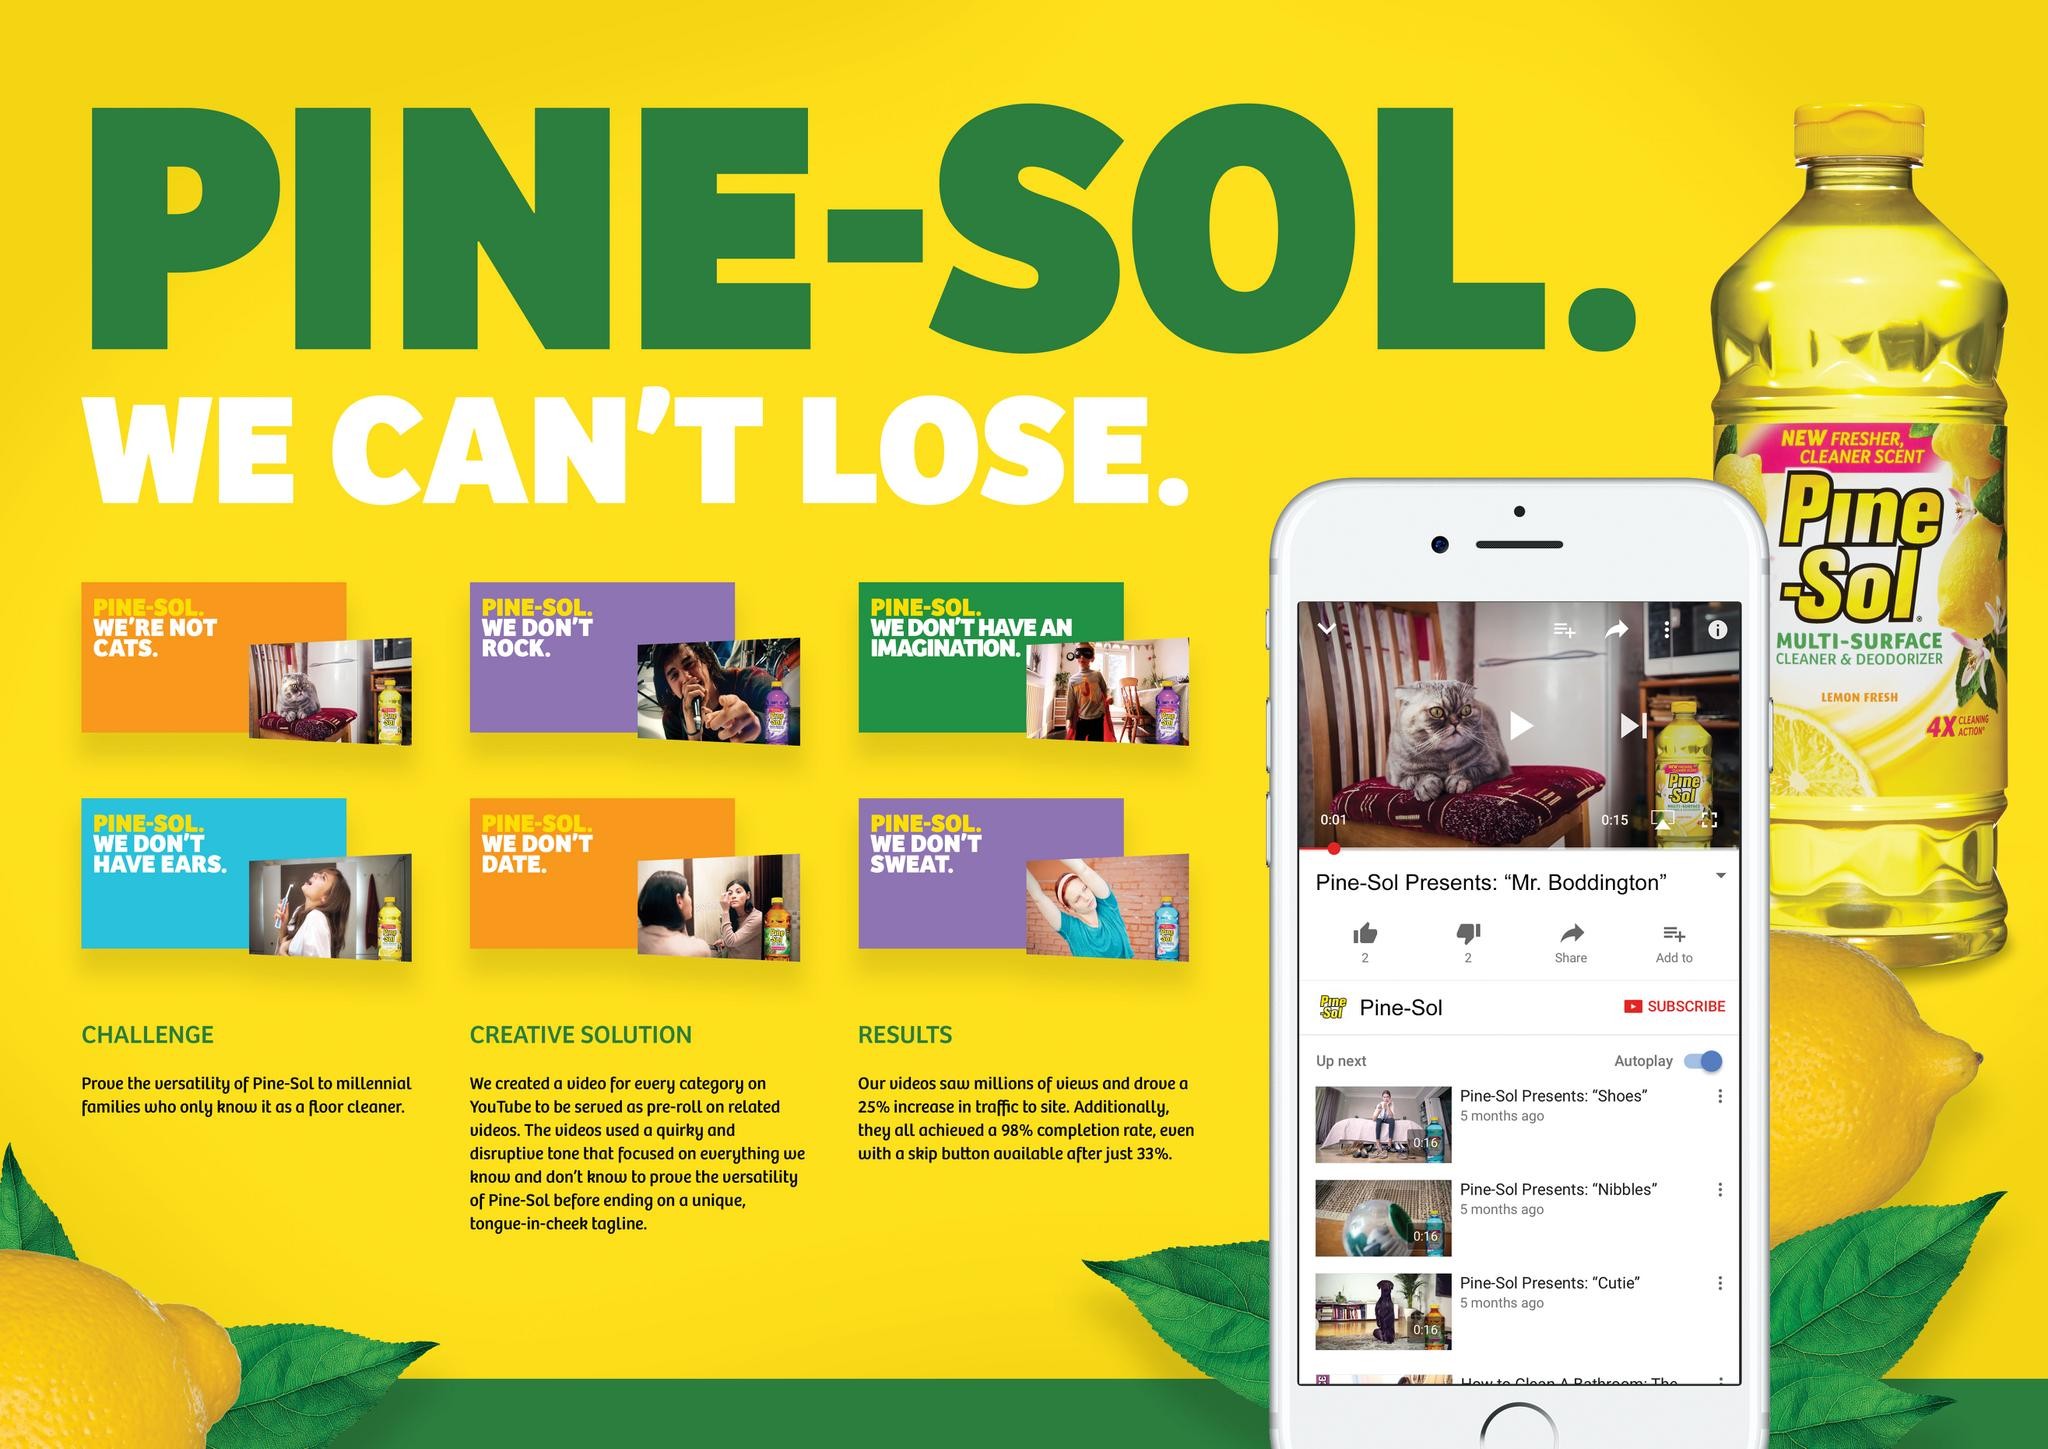 Pine-Sol. We Clean A Lot of Things.